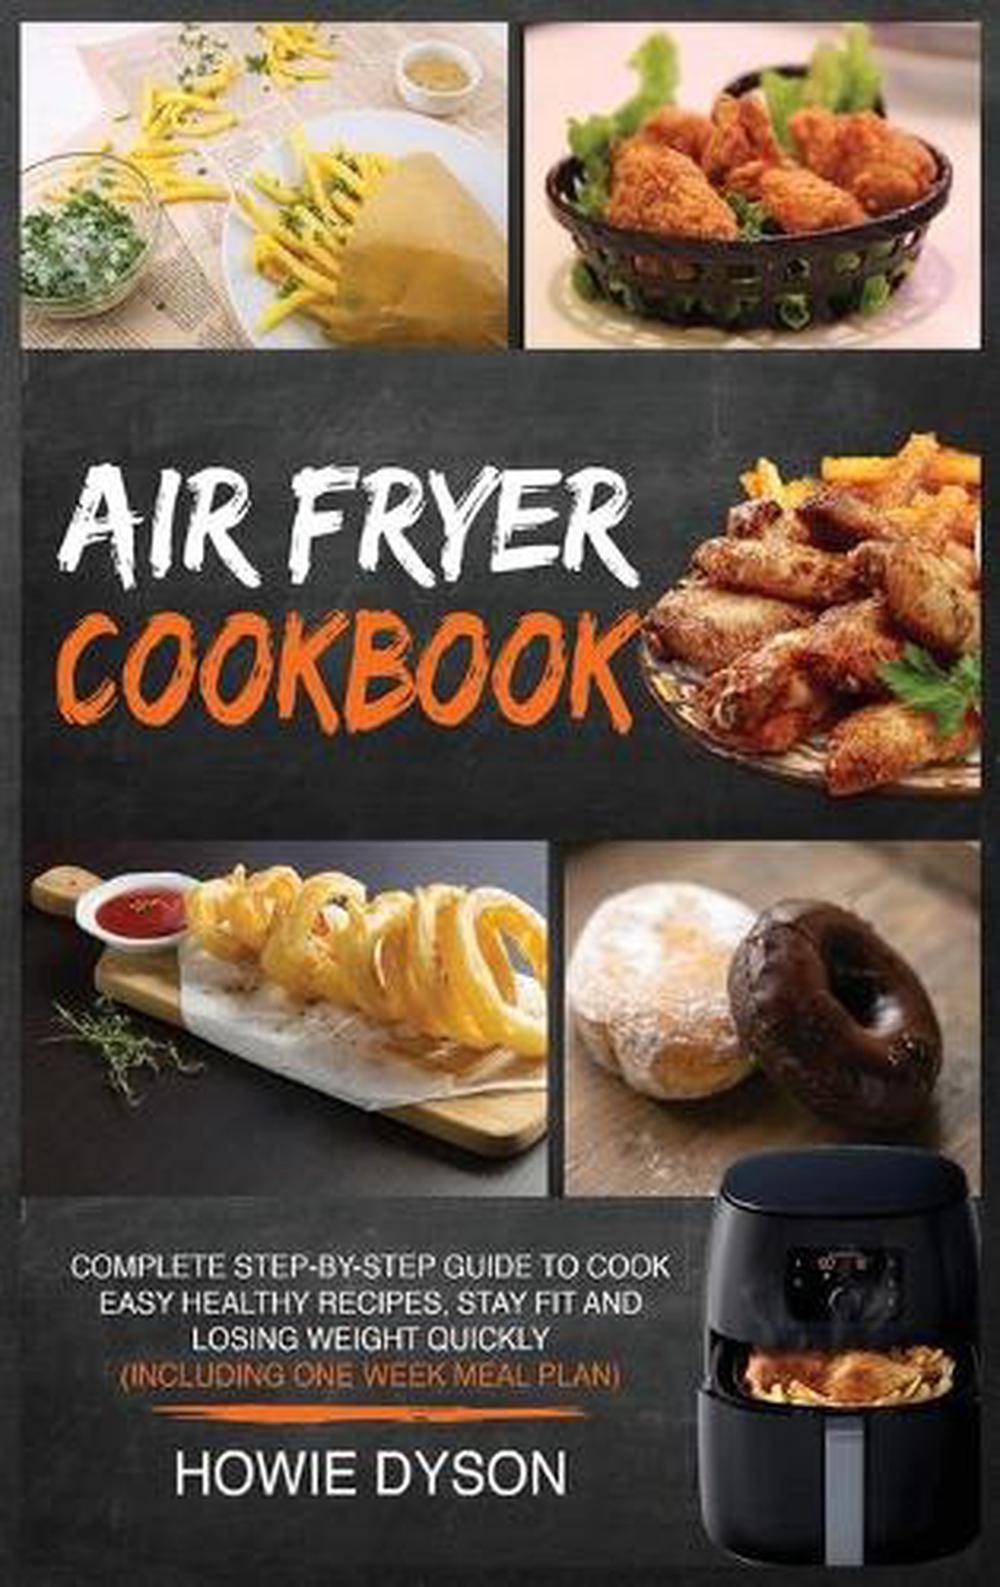 Air Fryer Cookbook by Dyson Howie Dyson (English) Hardcover Book Free ...